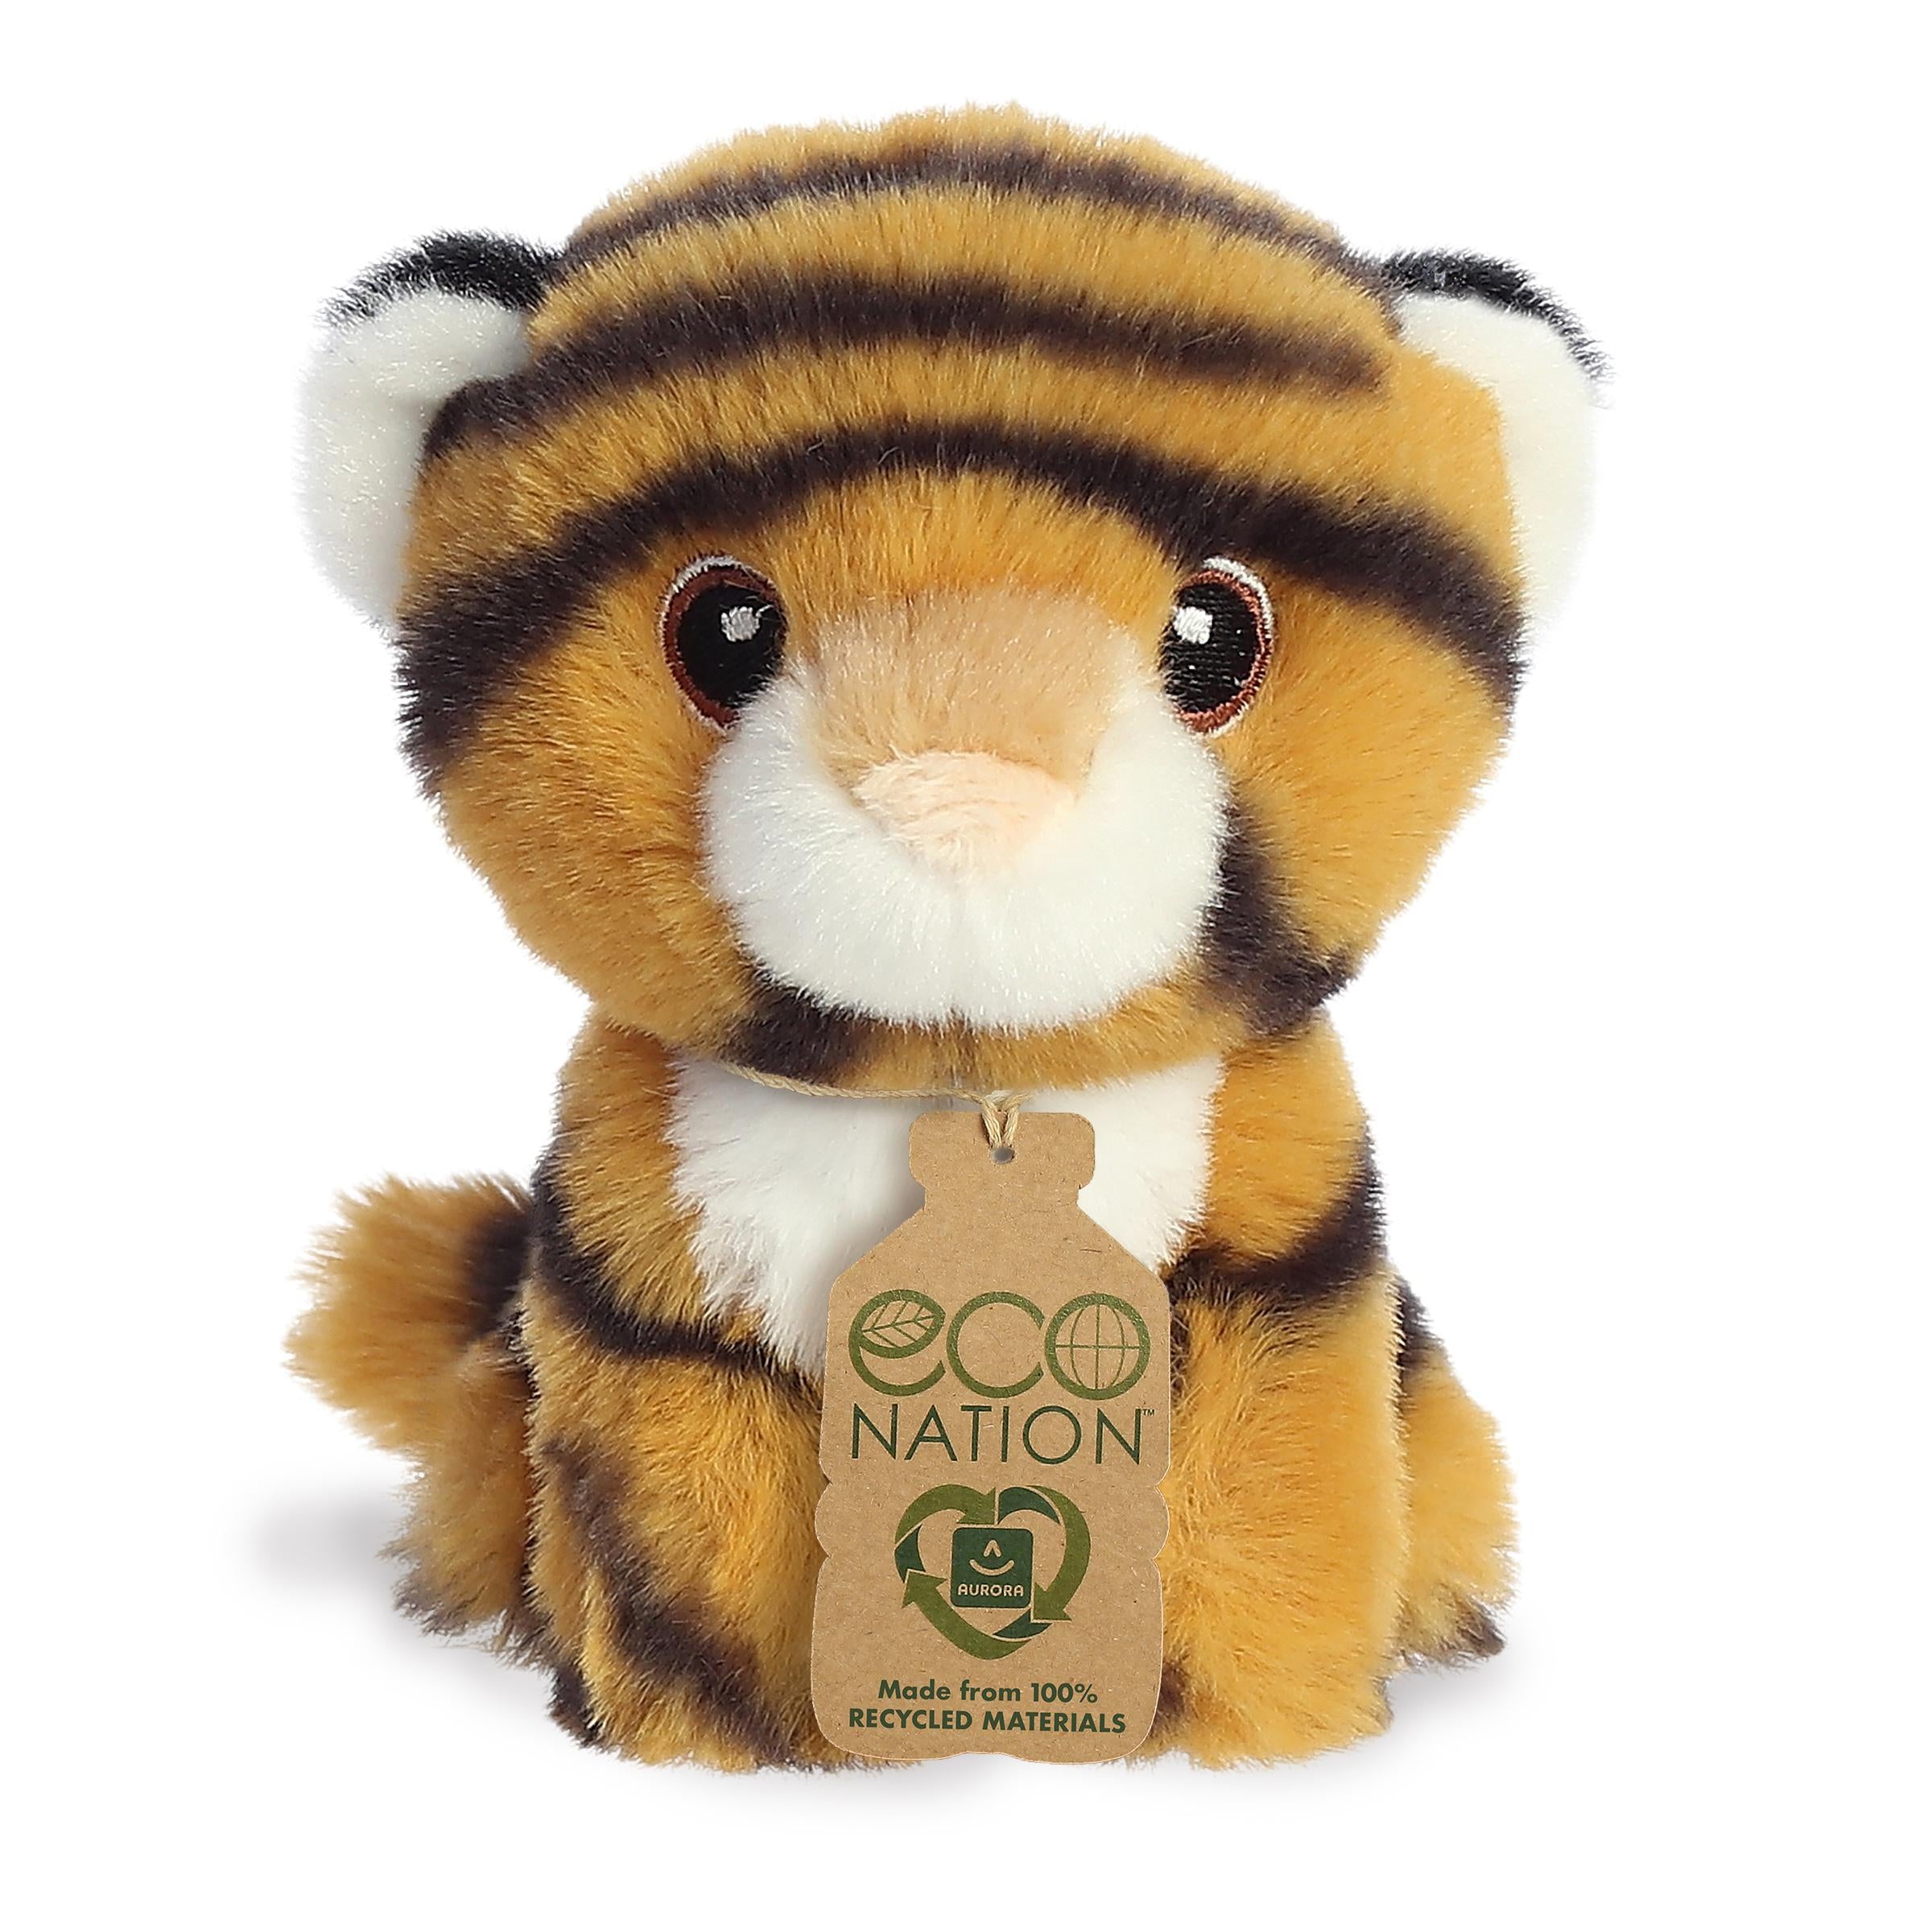 Lovely mini tiger plush with an orange and black coat, sweet embroidered eyes, and an eco-nation tag by its neck